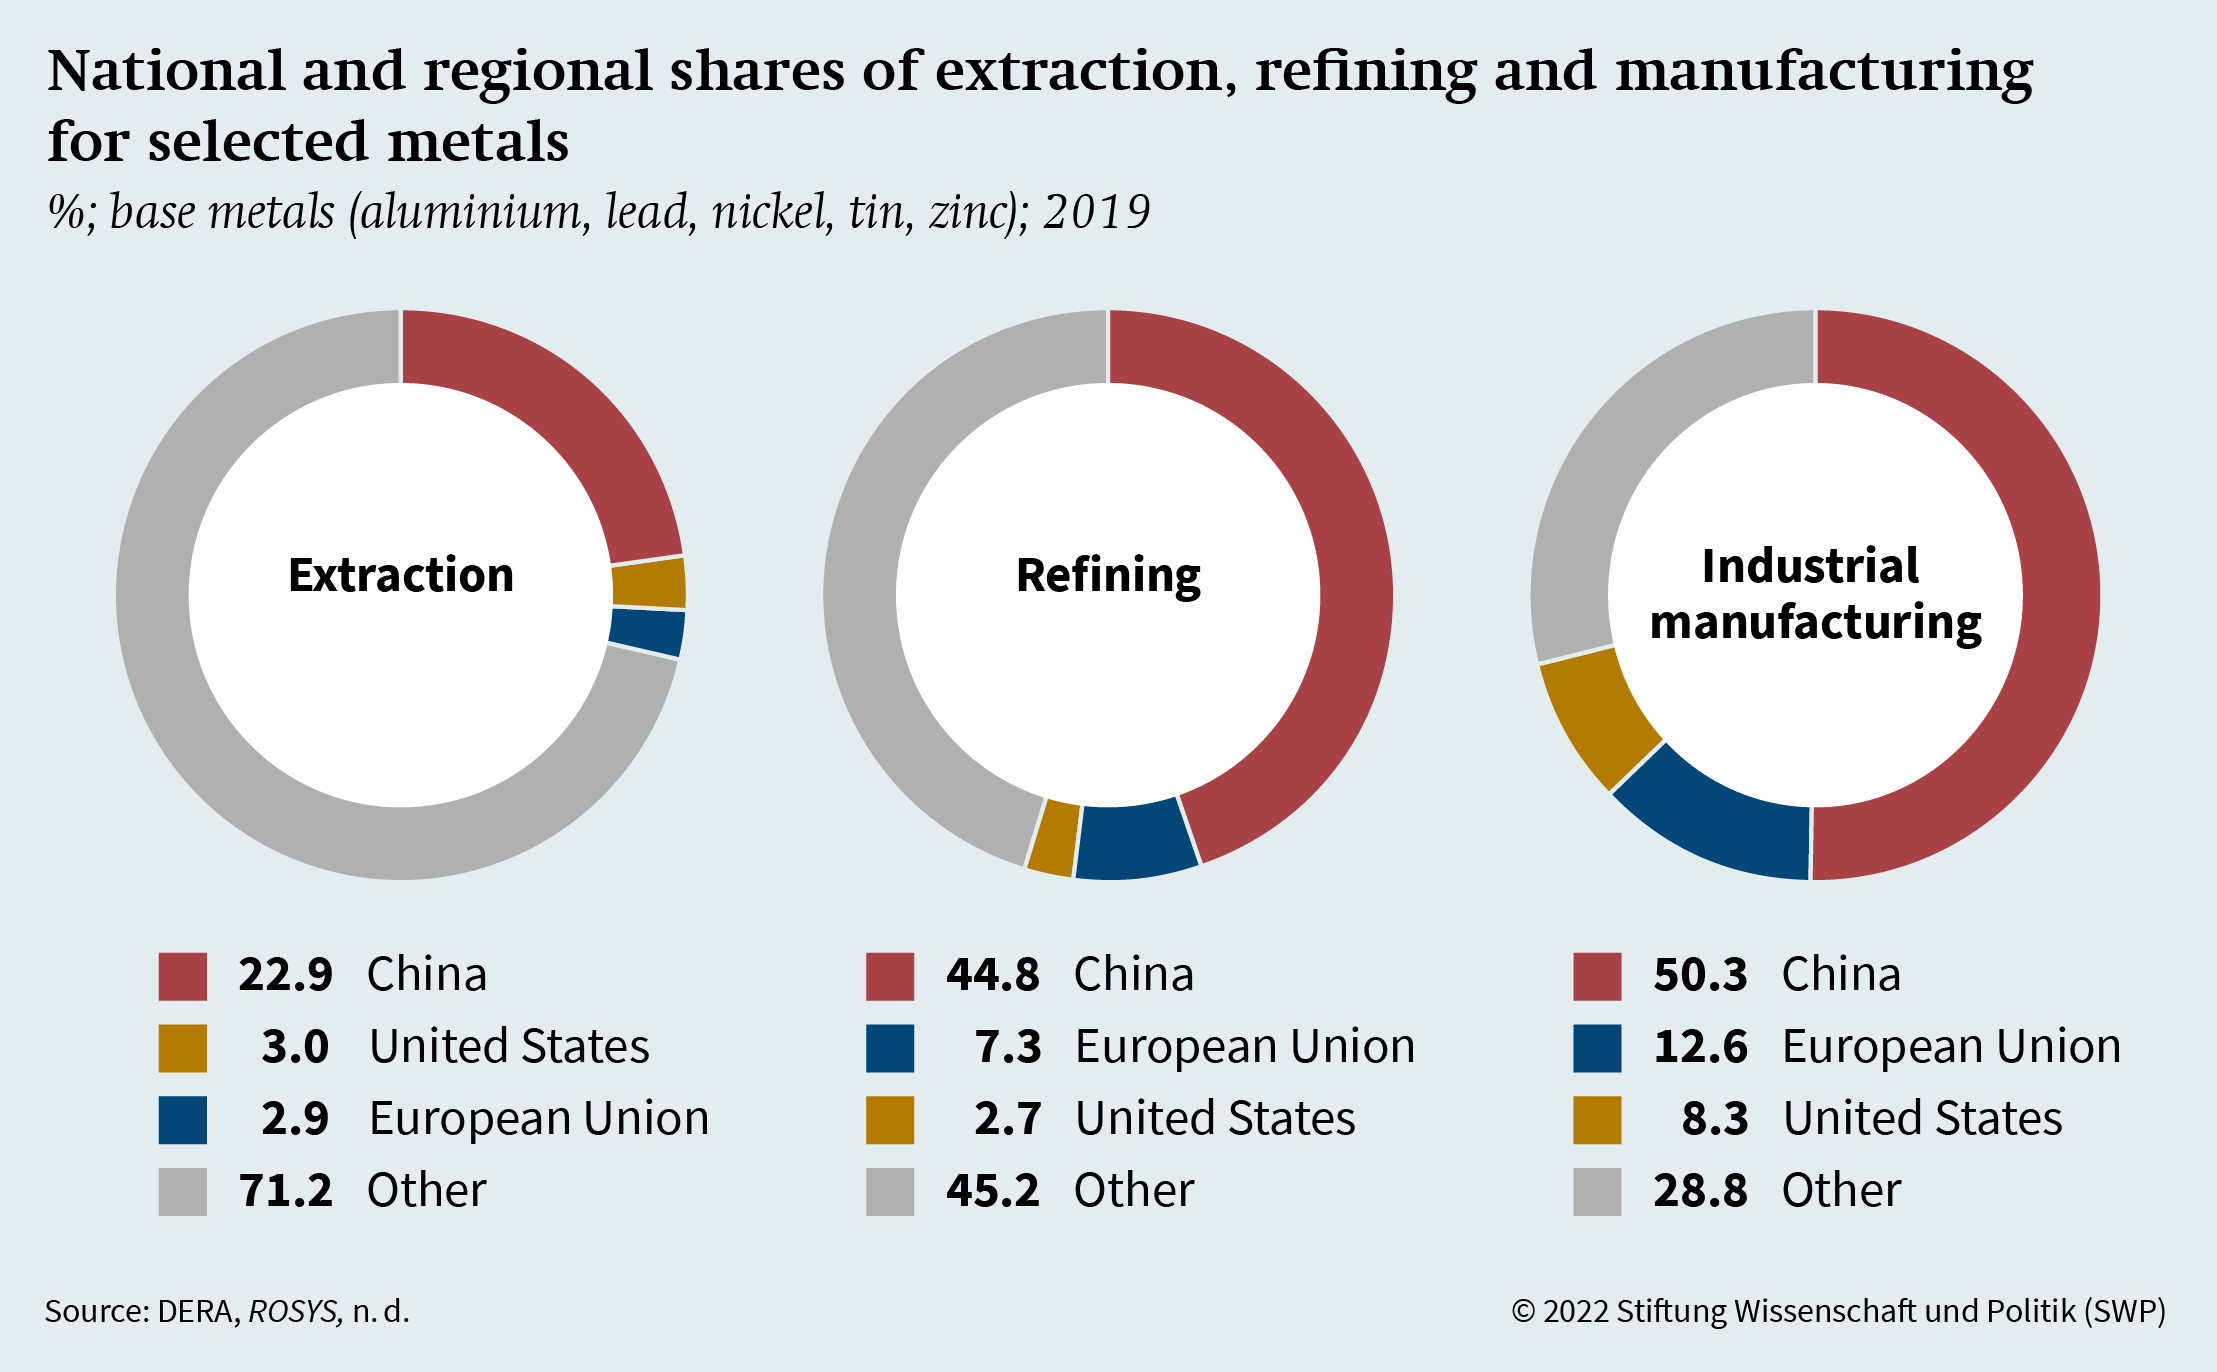 National and regional shares of extraction, refining and manufacturing for selected metals